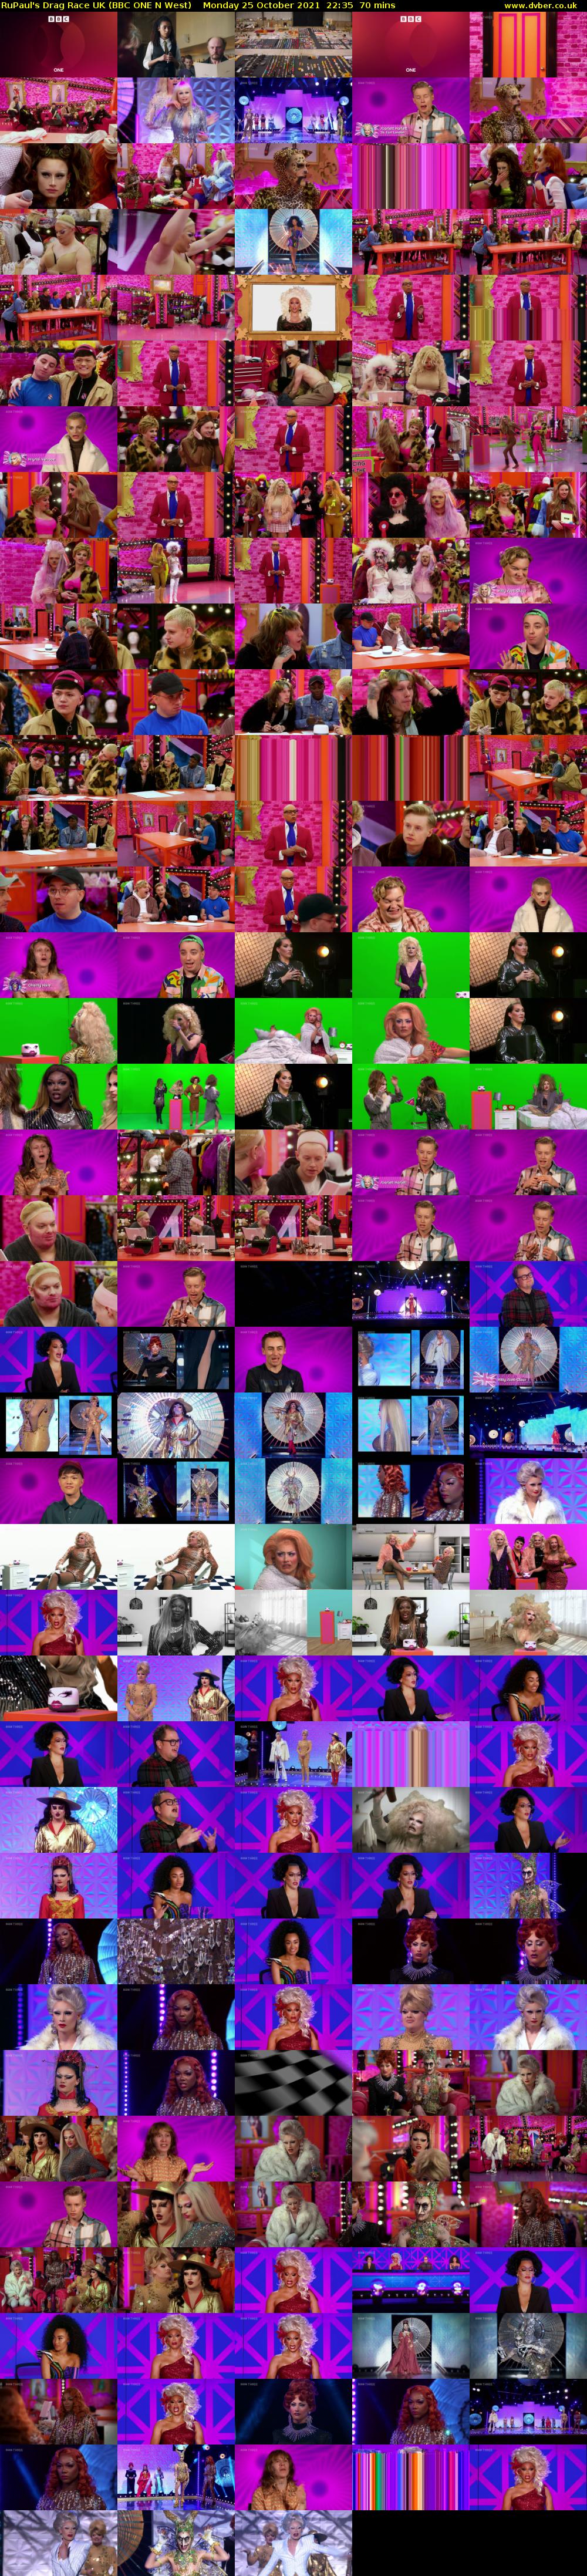 RuPaul's Drag Race UK (BBC ONE N West) Monday 25 October 2021 22:35 - 23:45